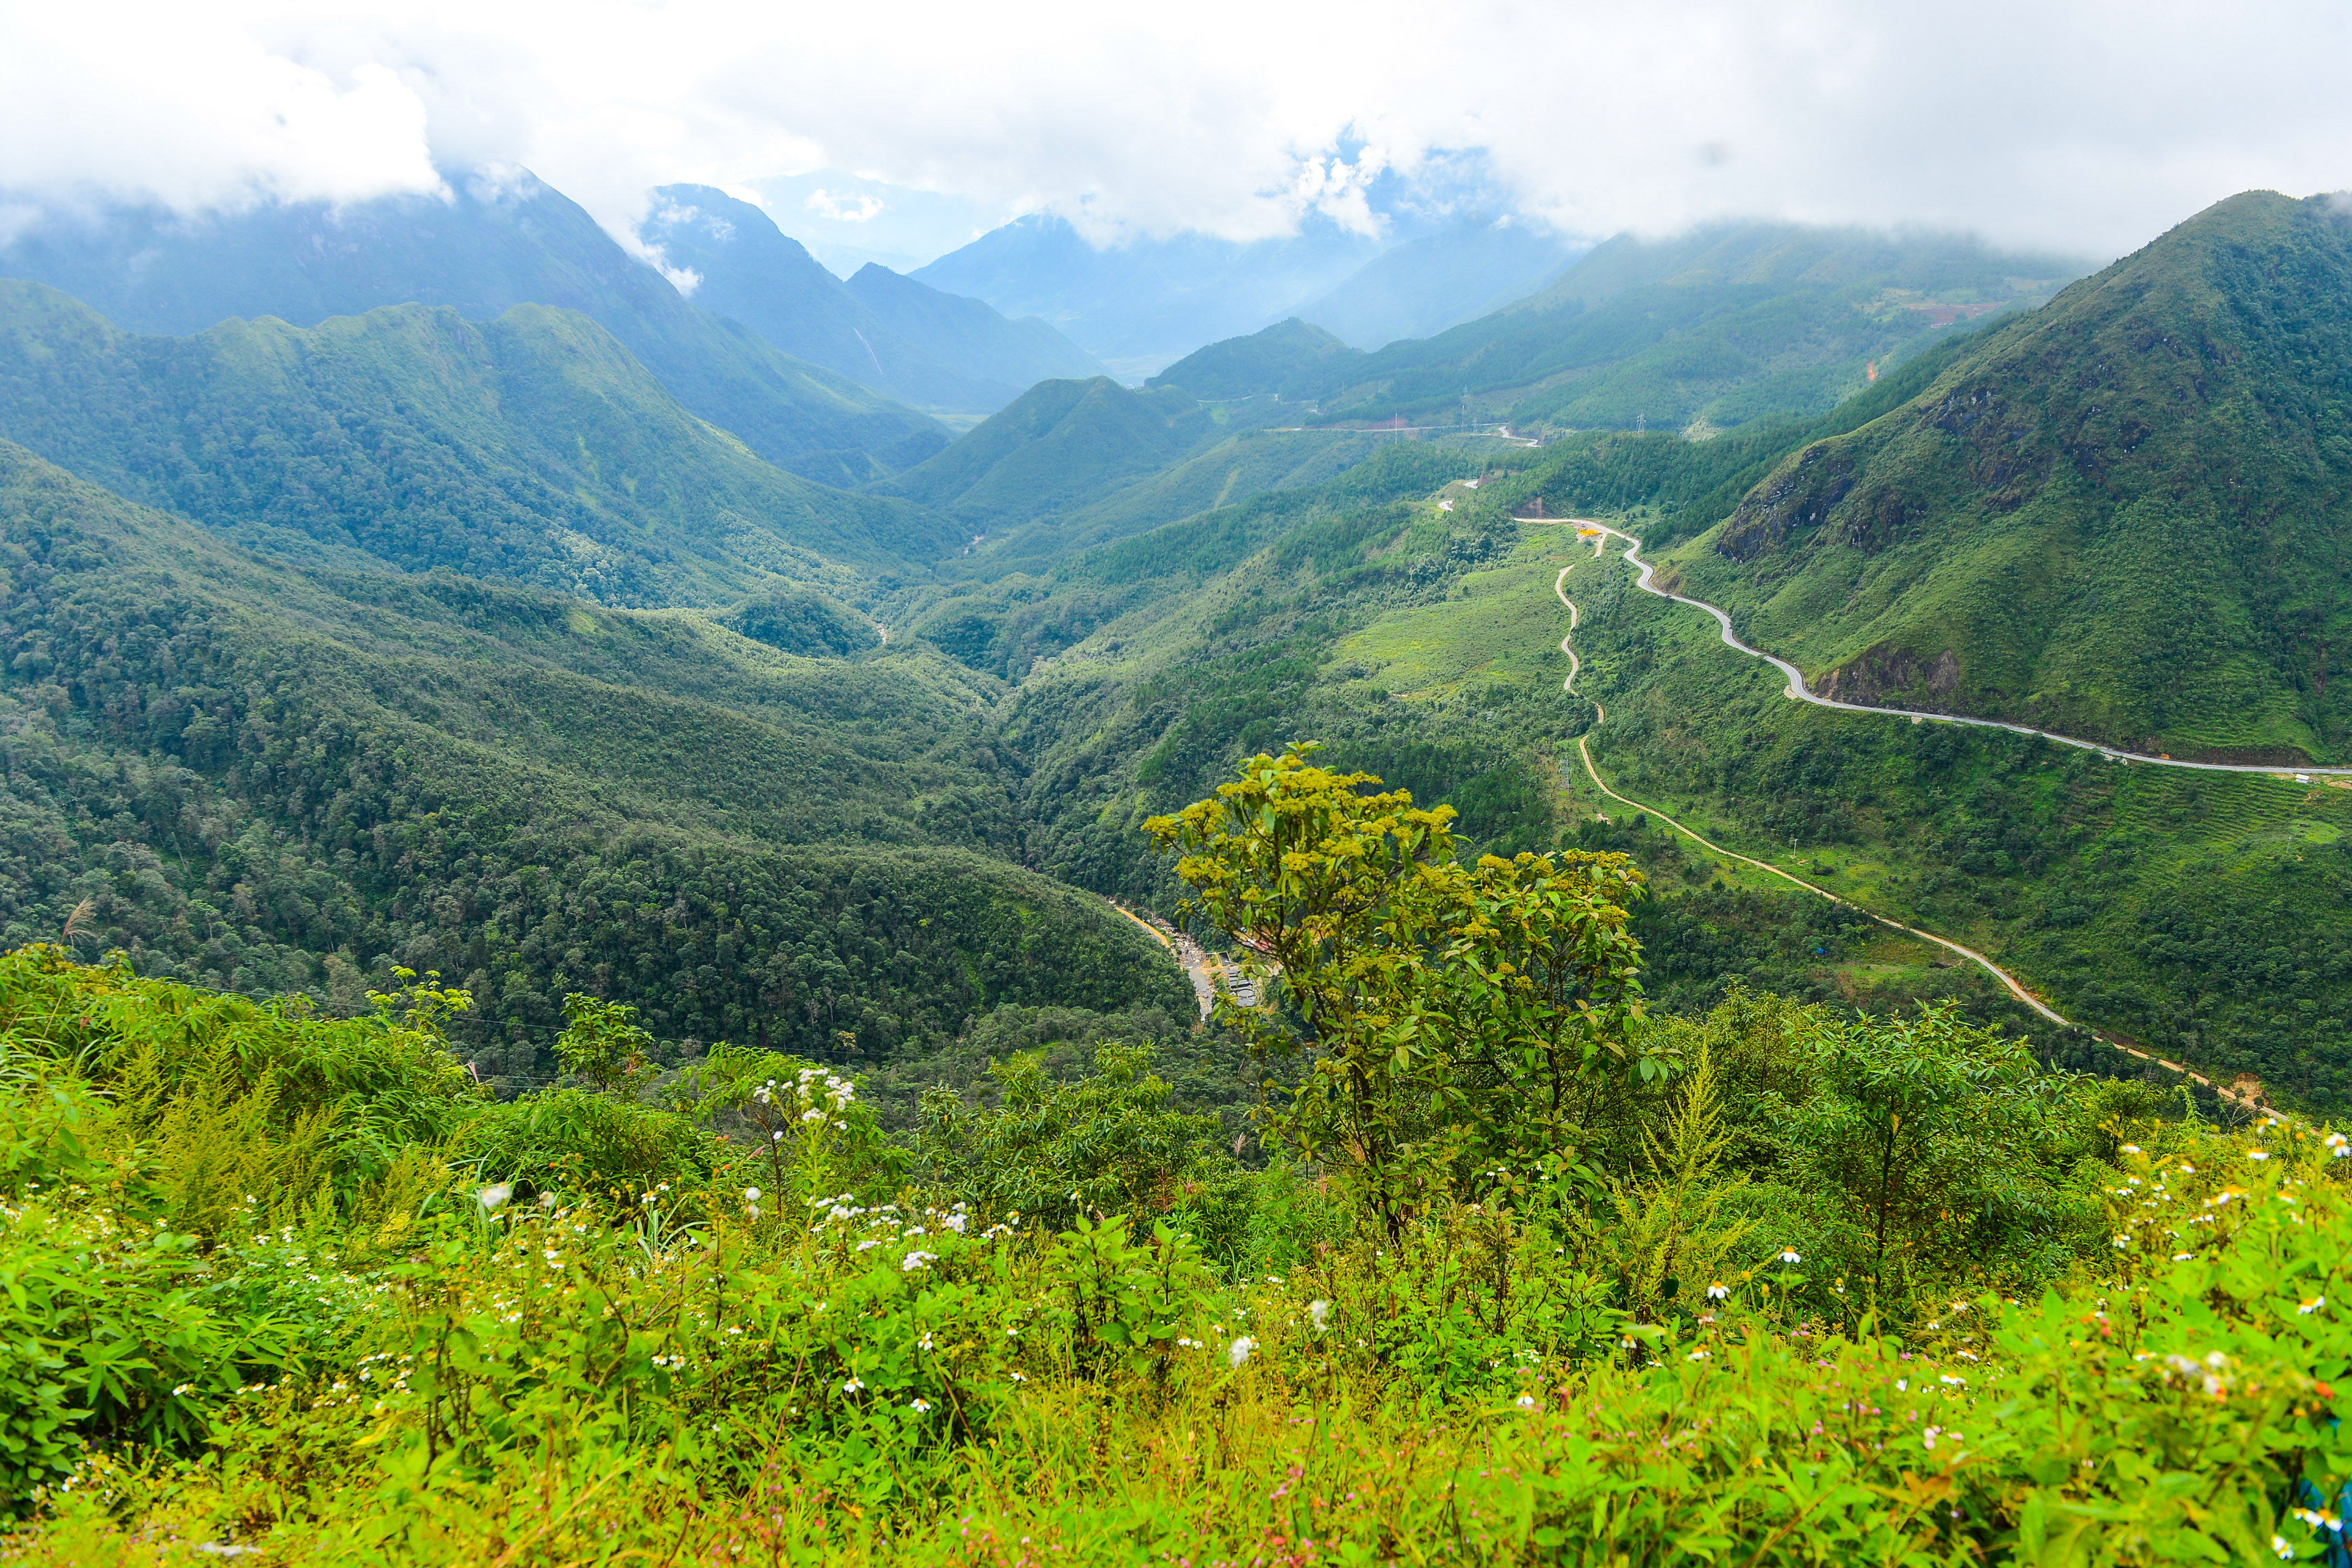 O Quy Ho Pass in the border of Lai Chau and Lao Cai provinces, VIetnam. Photo: Quang Dinh / Tuoi Tre News